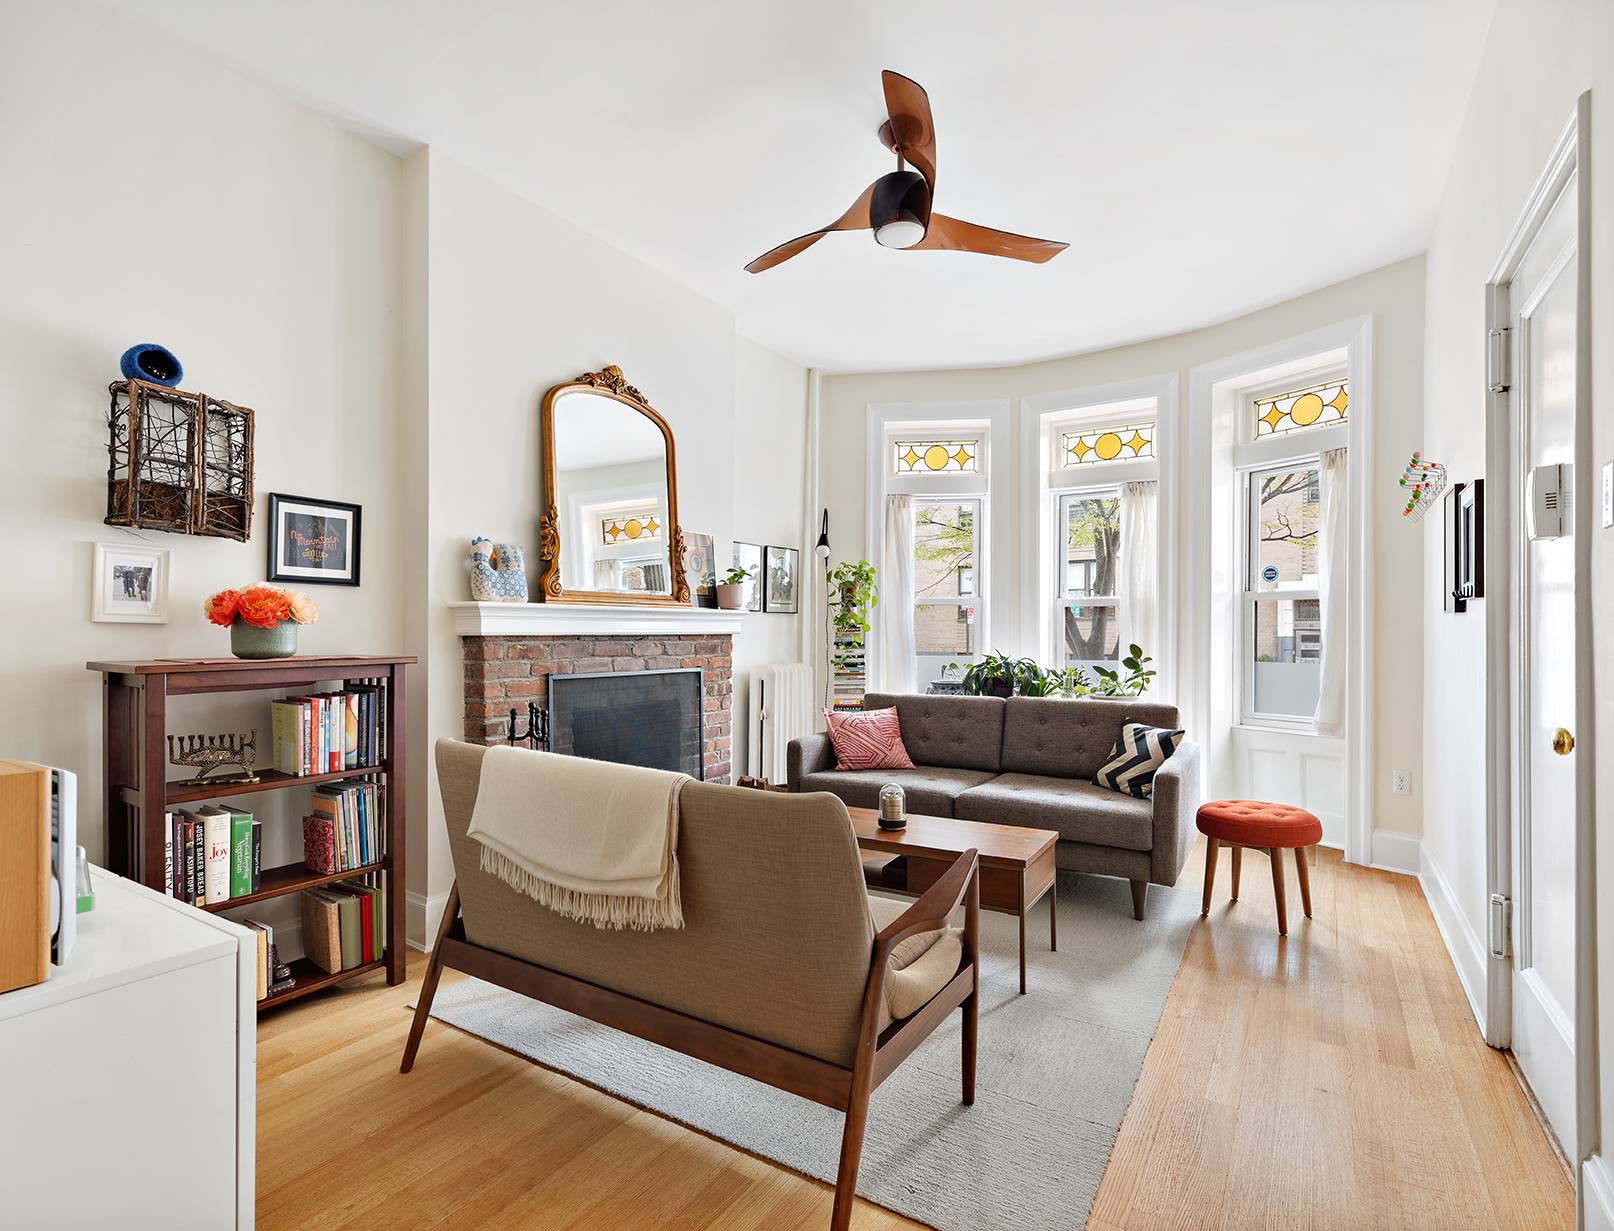 This captivating two bedroom, one and a half bath pre war home with private outdoor deck offers you a peaceful retreat right in the heart of beautiful Park Slope.